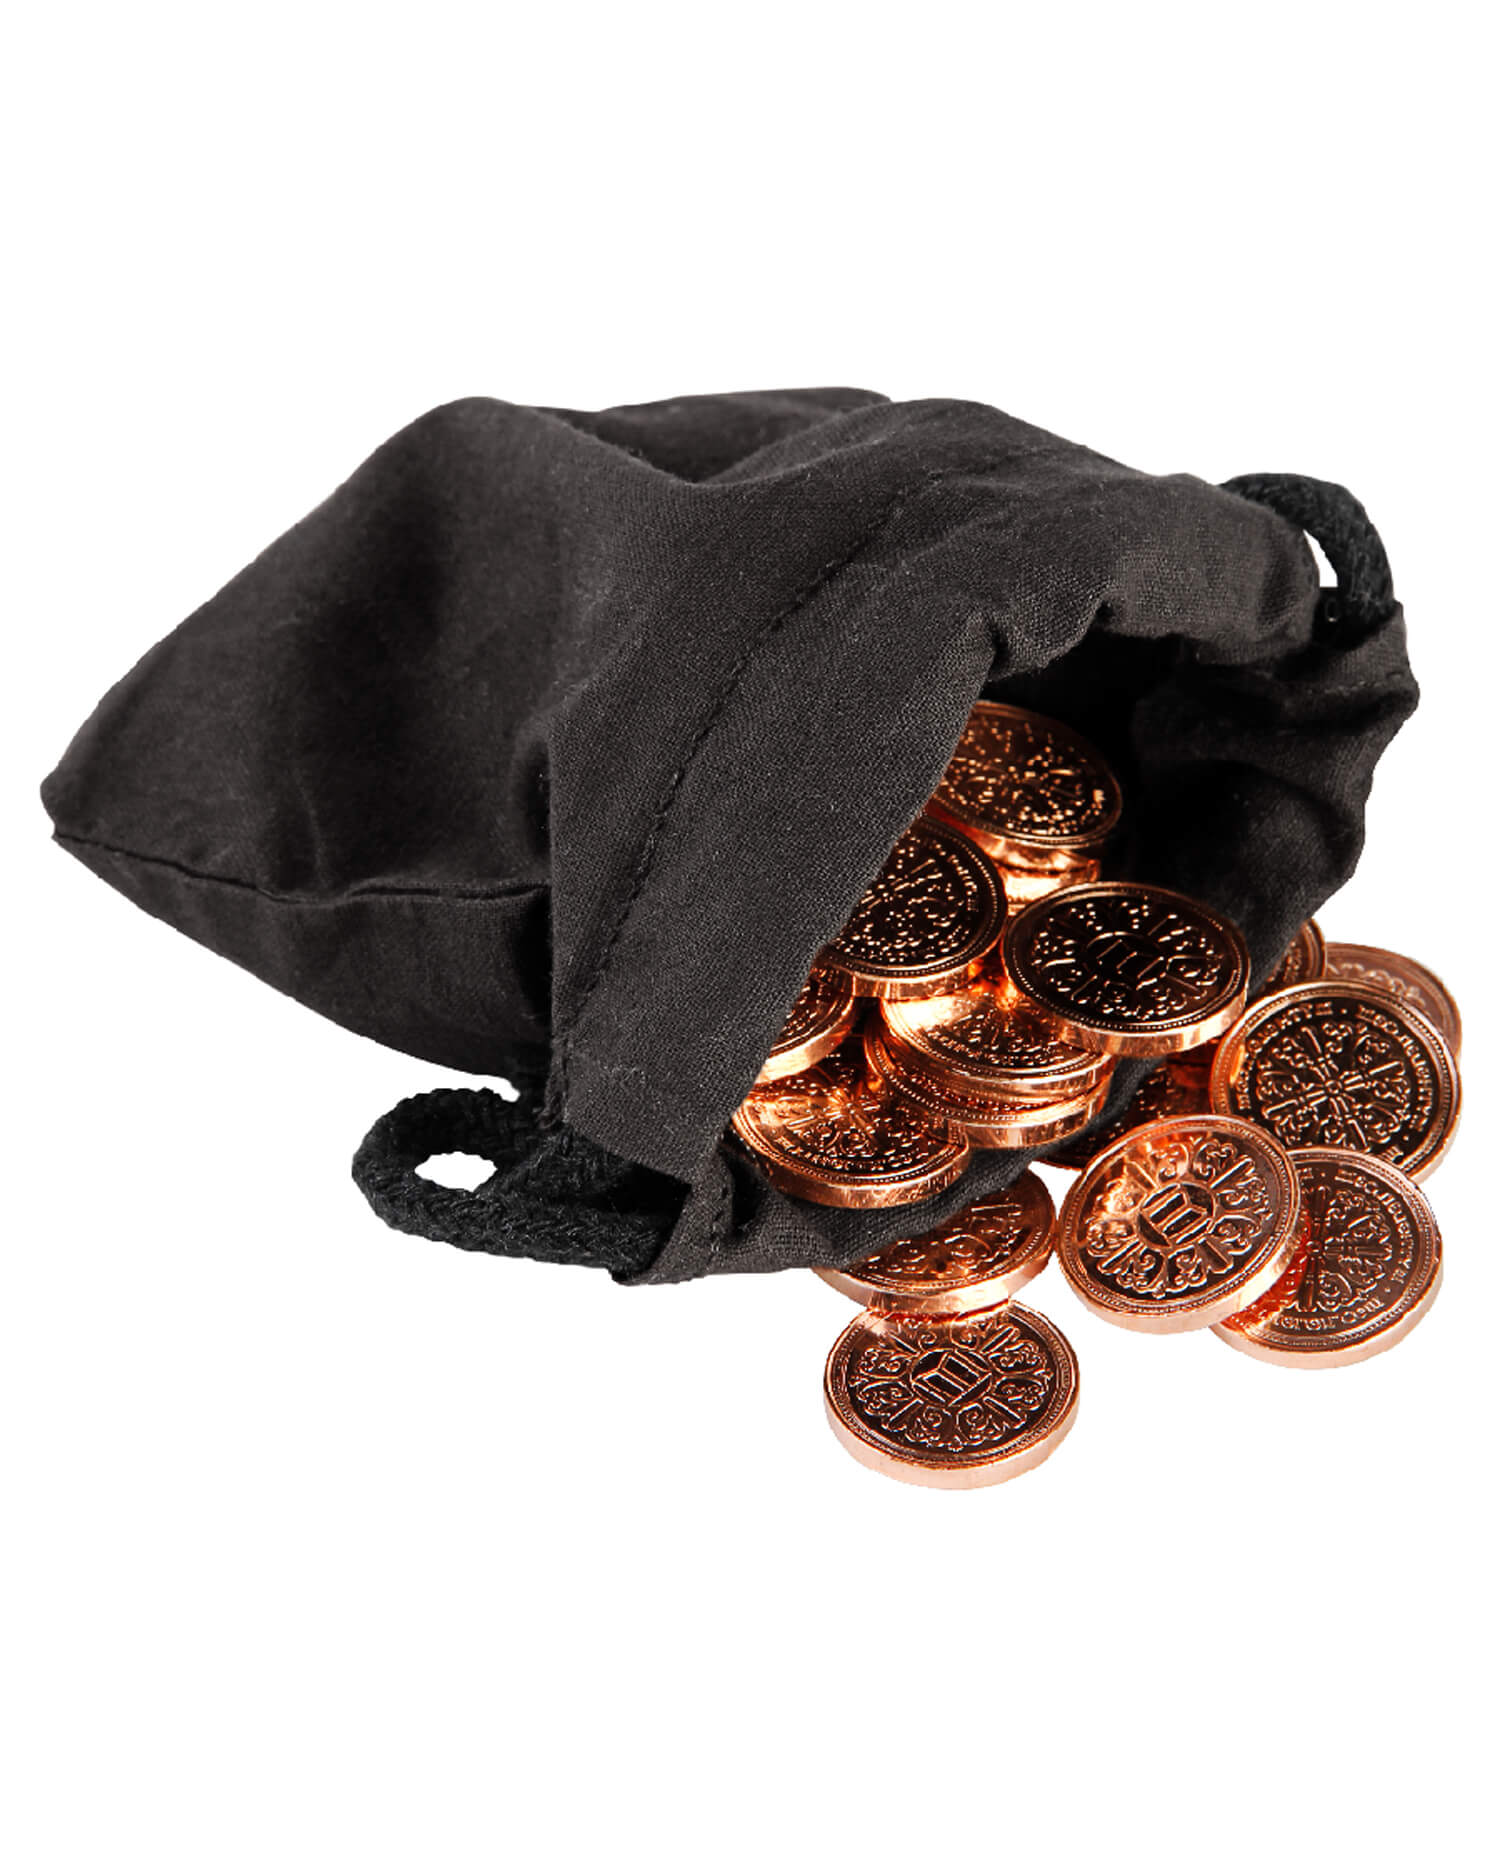 10 copper coins with black cloth bag